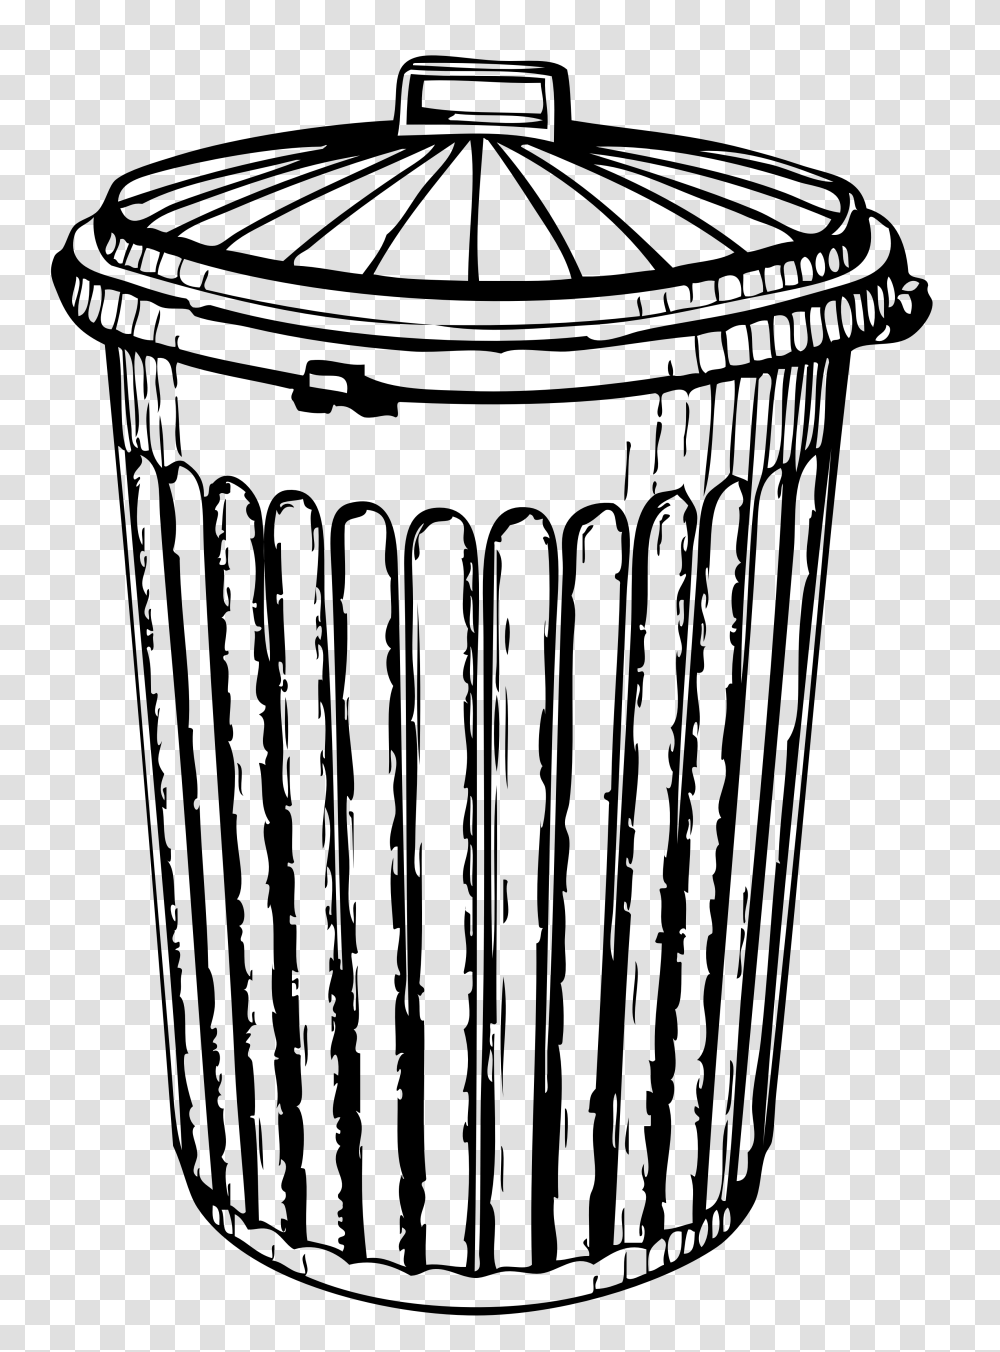 Garbage Can Clipart Desktop Backgrounds, Tin, Trash Can, Mailbox, Letterbox Transparent Png